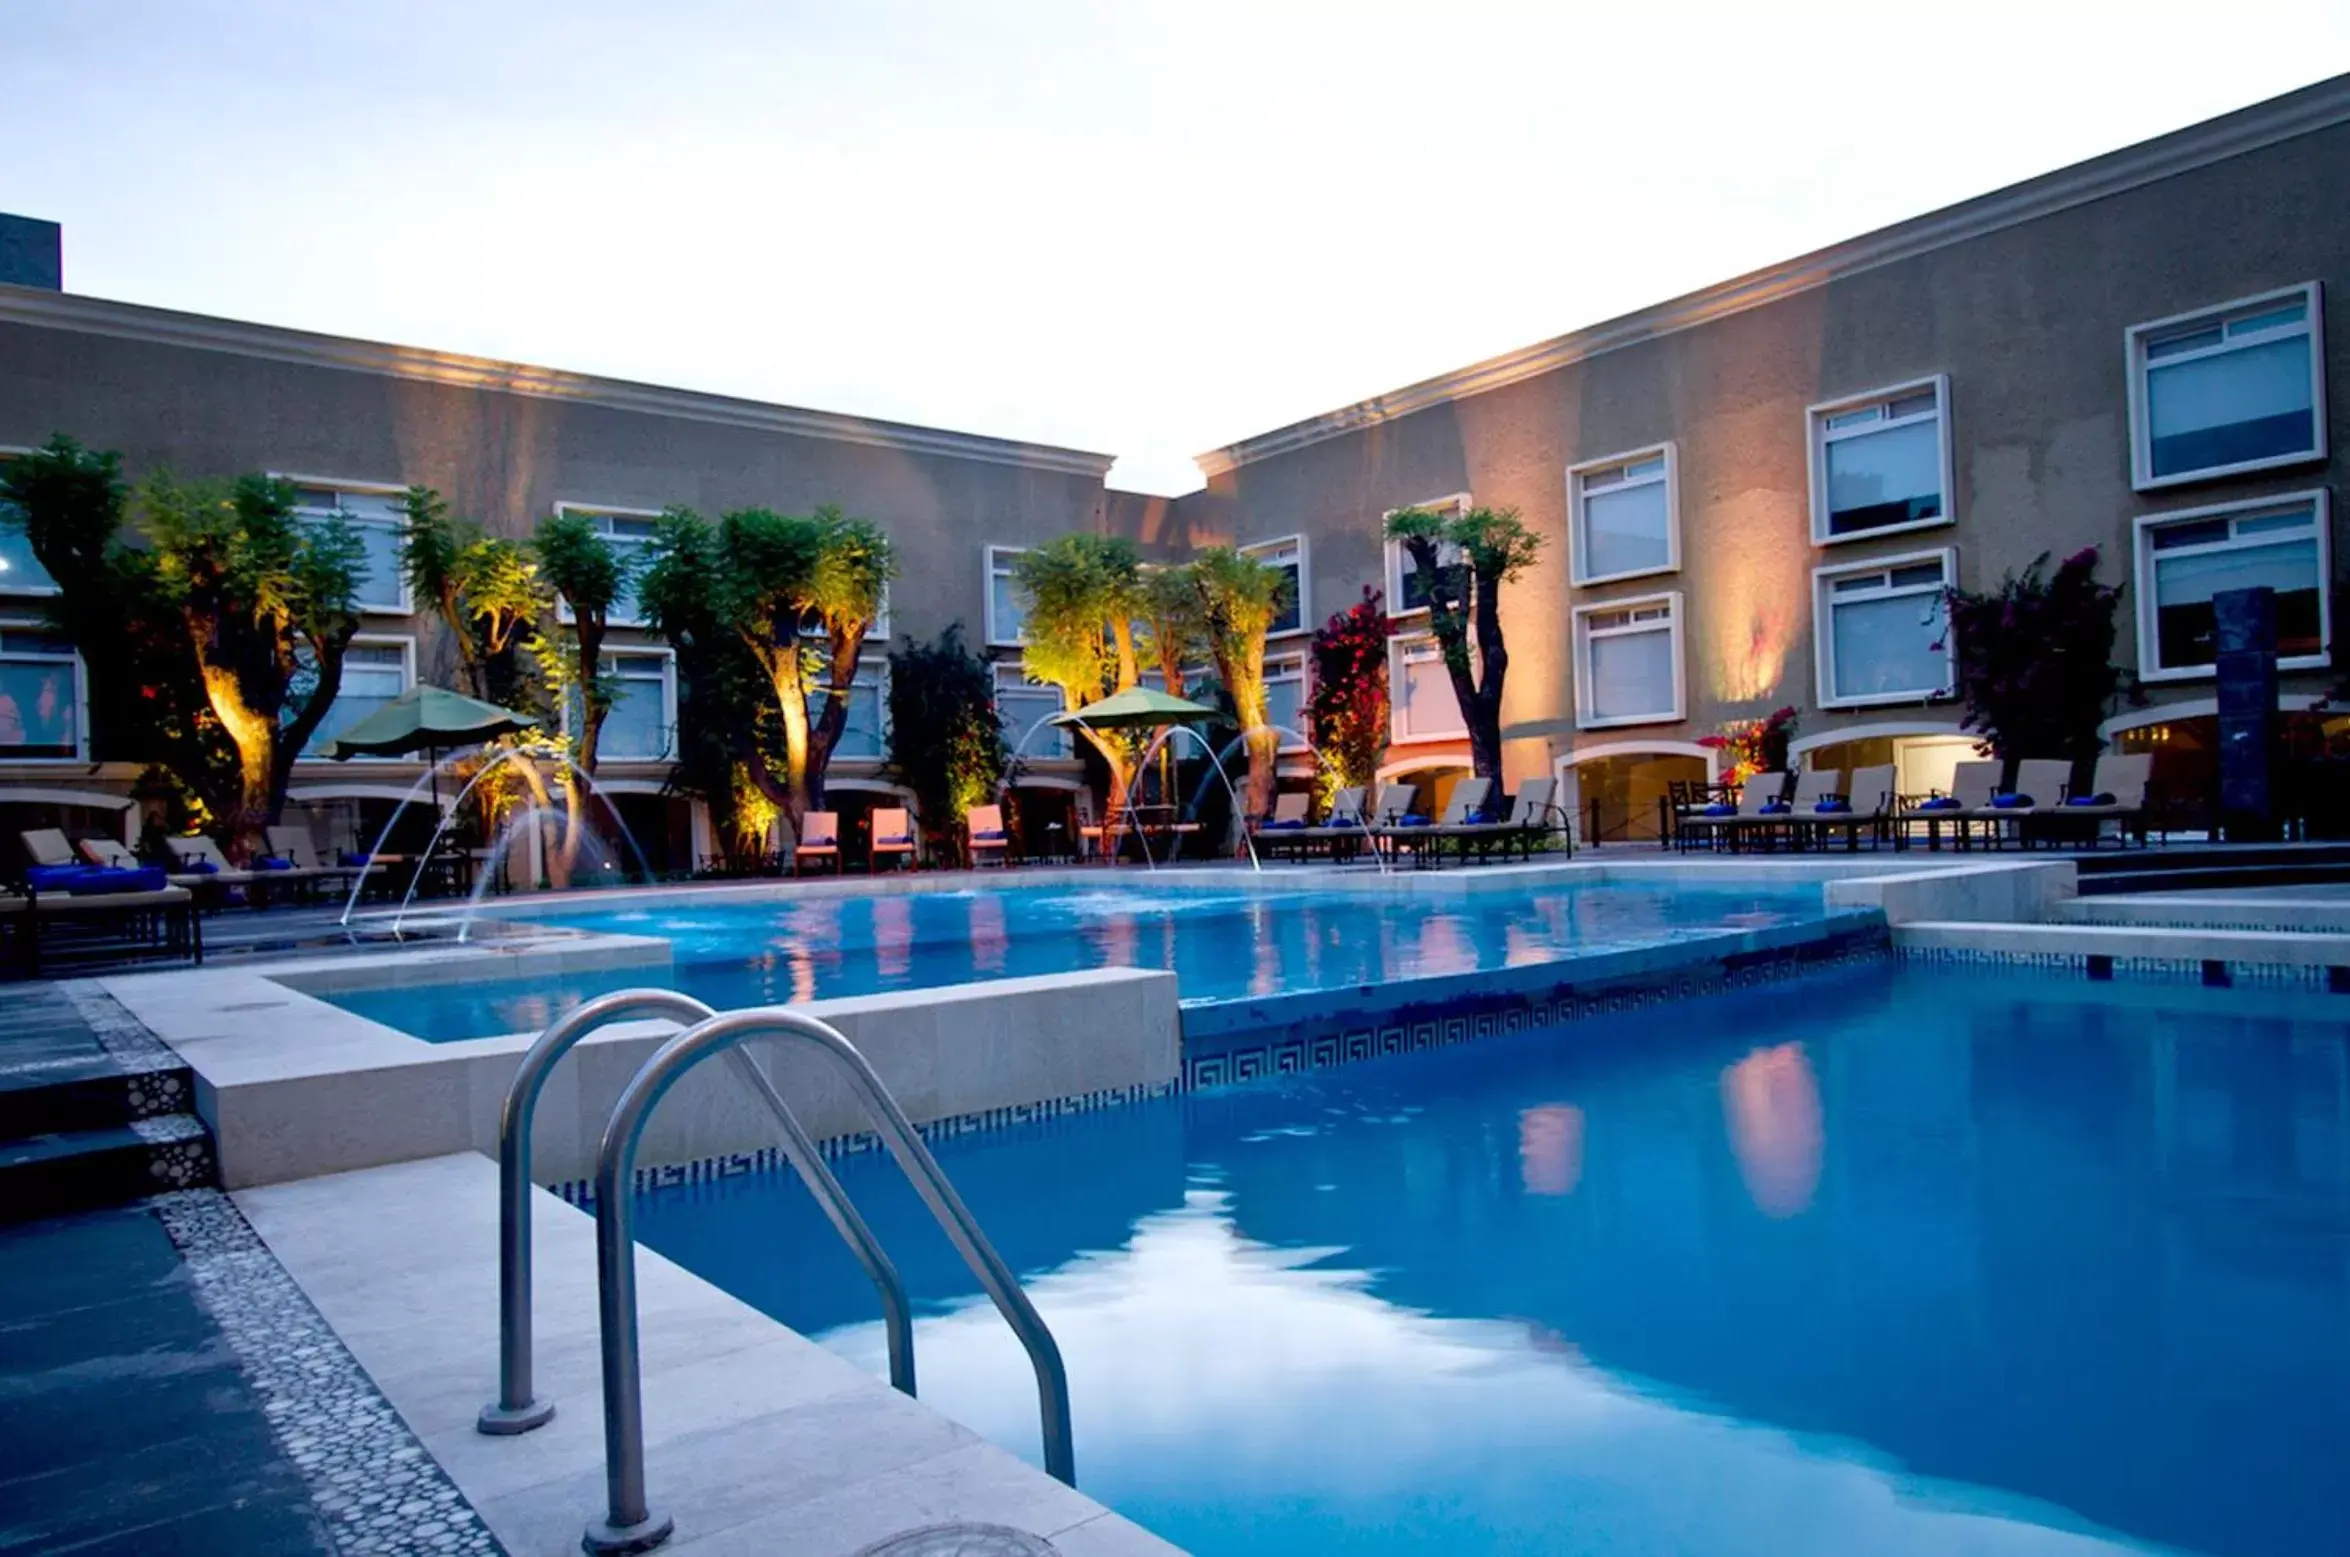 Property building, Swimming Pool in Plaza Camelinas Hotel